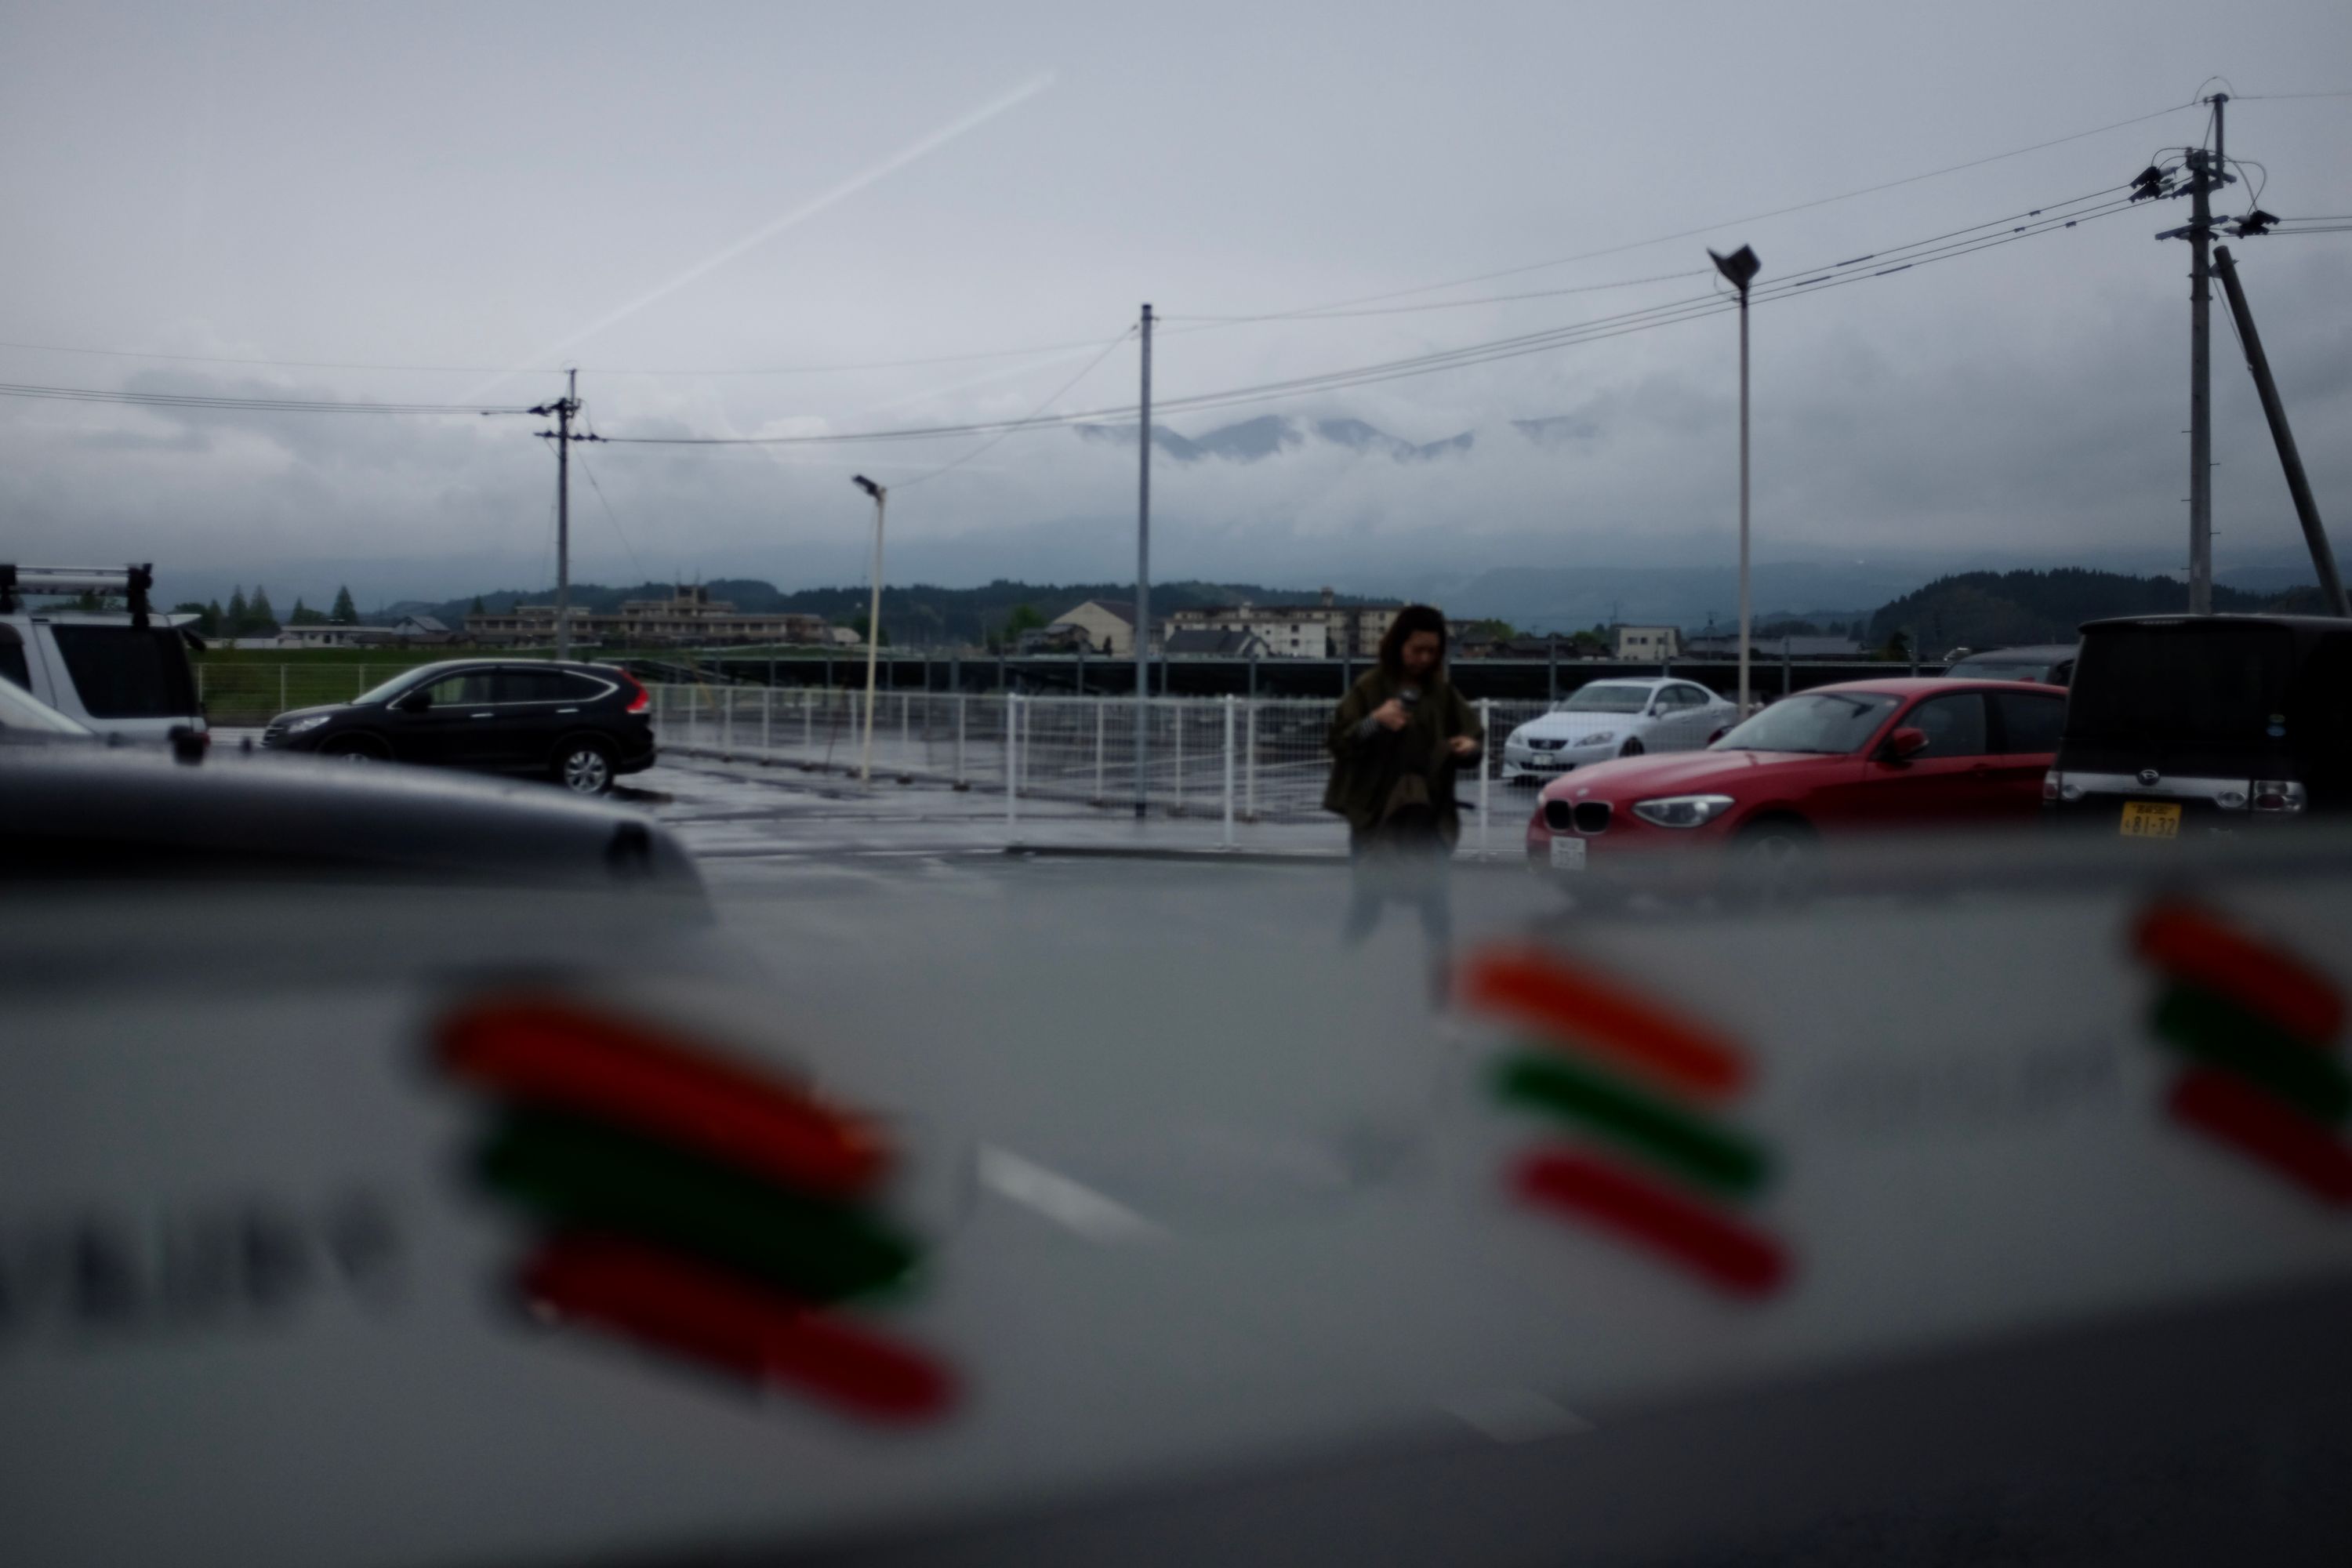 Looking out on the parking lot of a convenience store on a rainy day.